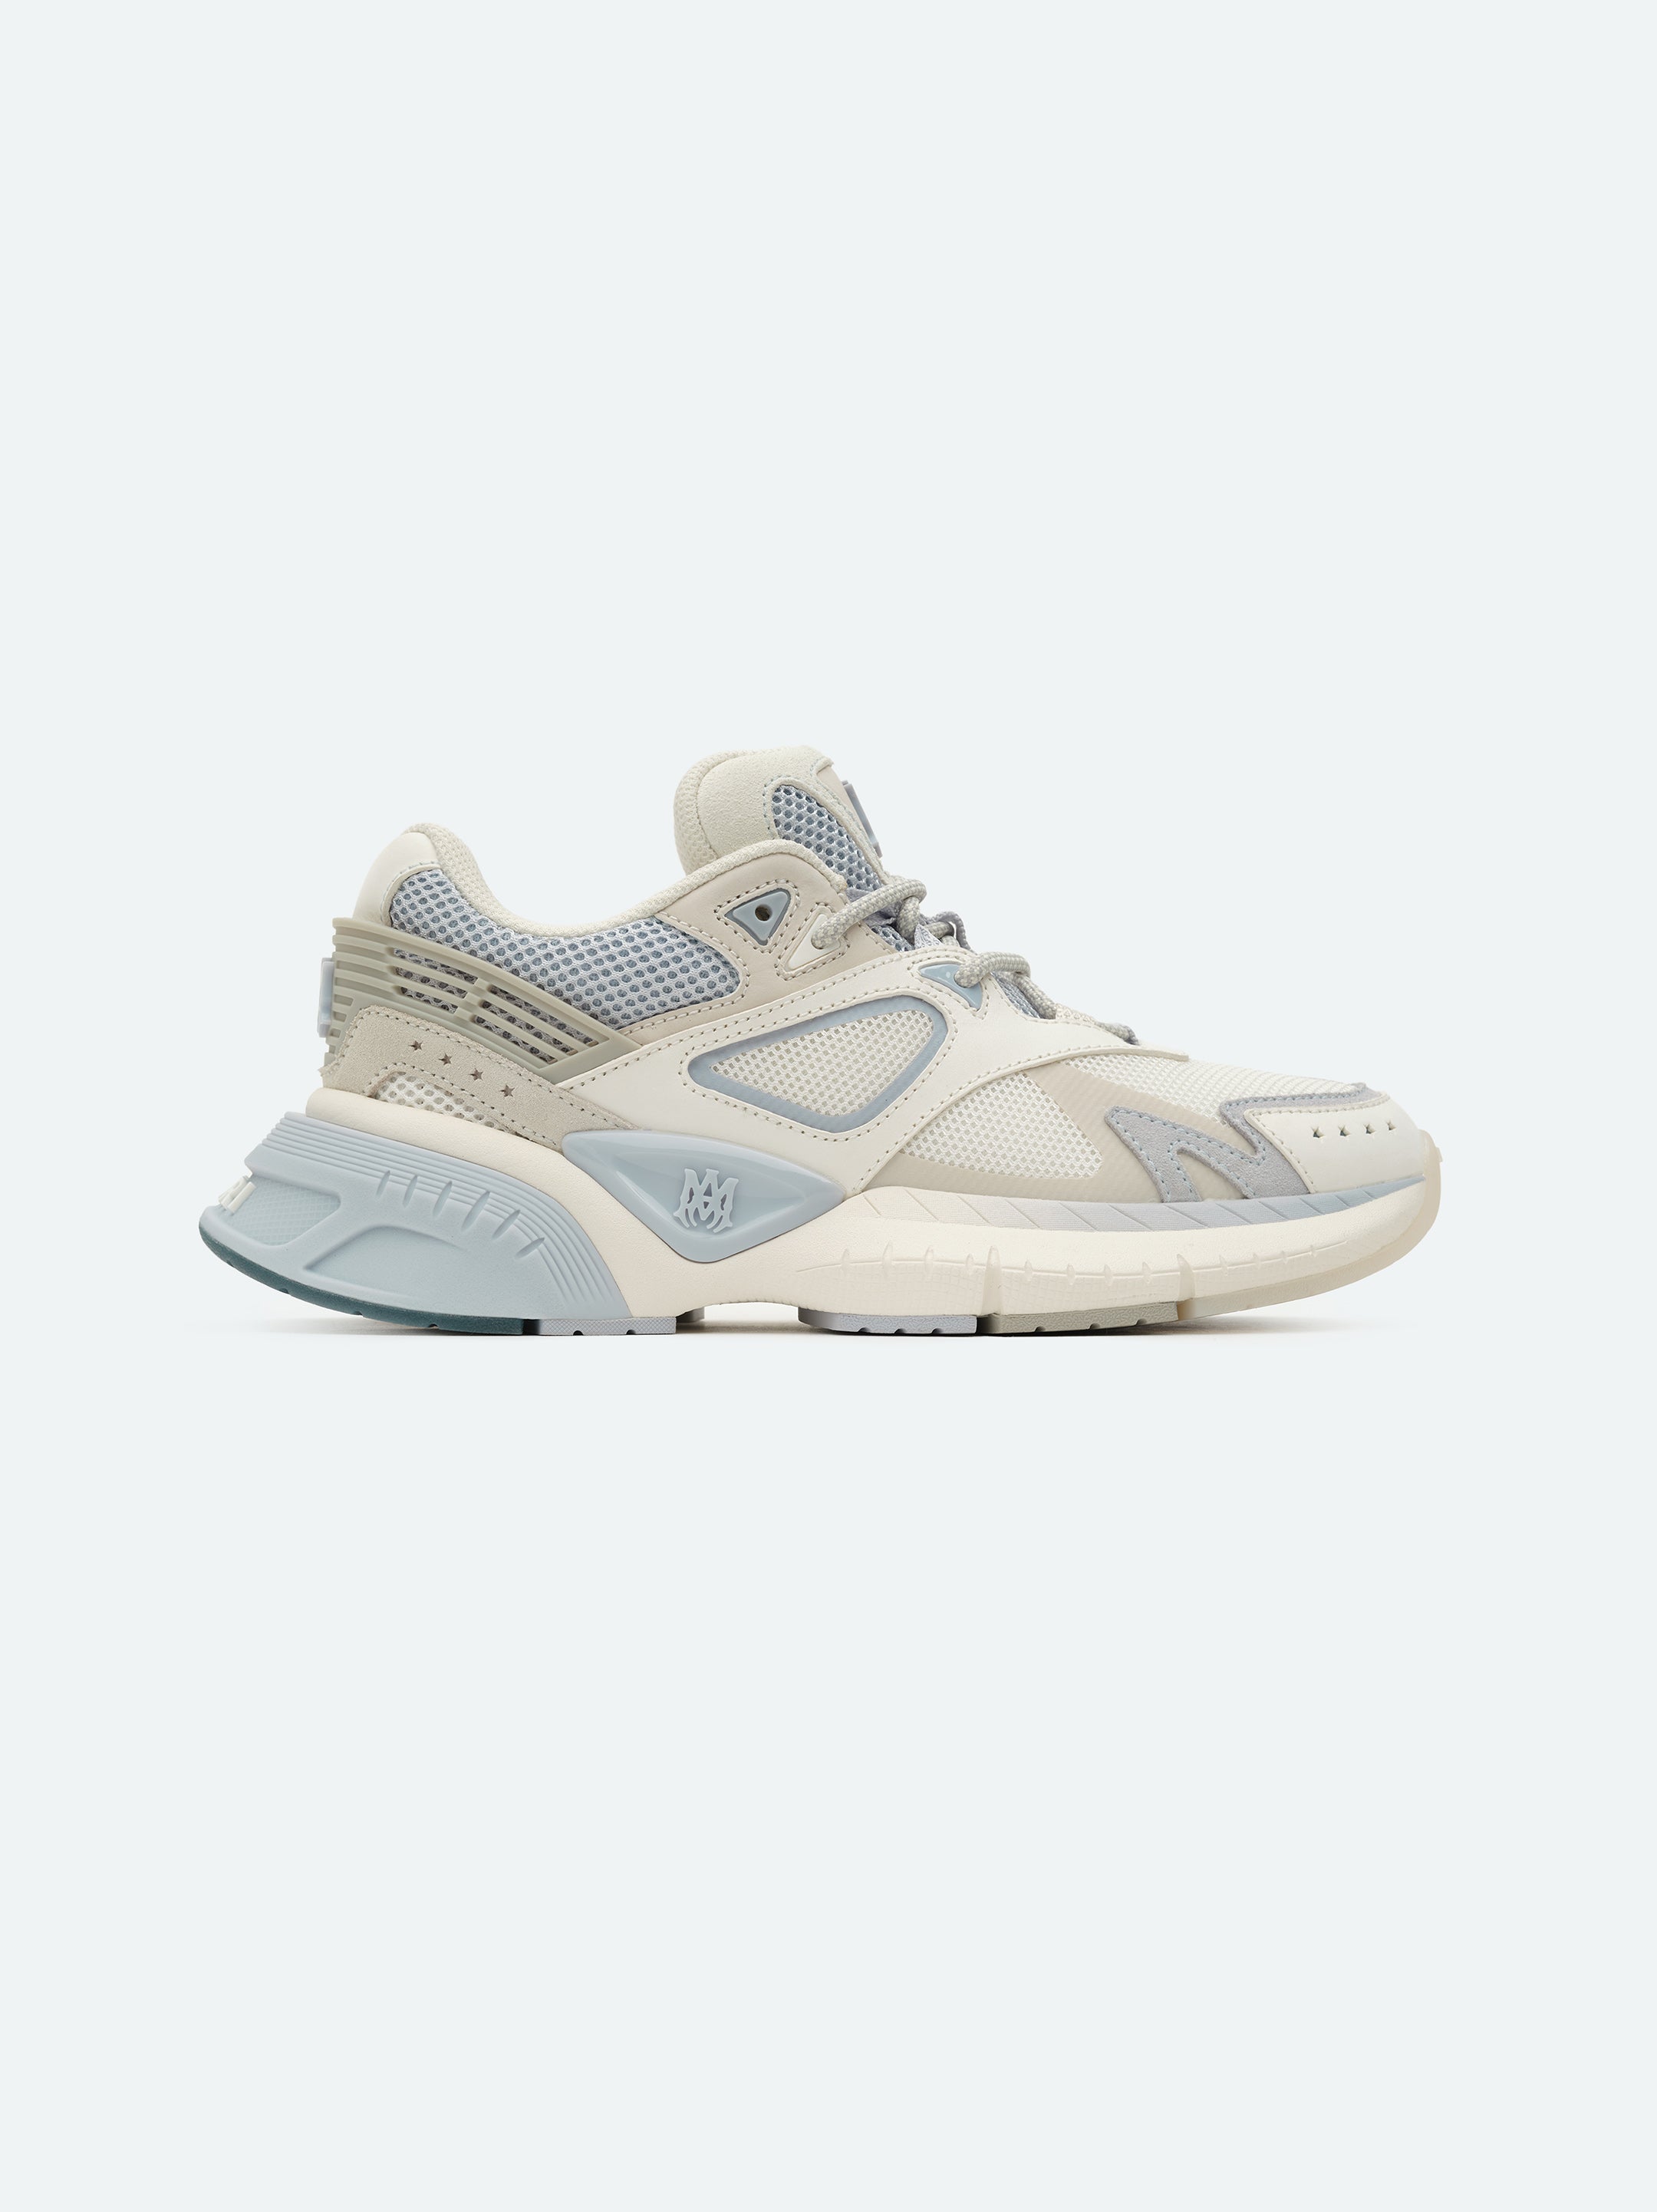 Product WOMEN - WOMEN'S MA RUNNER - Grey Blue featured image